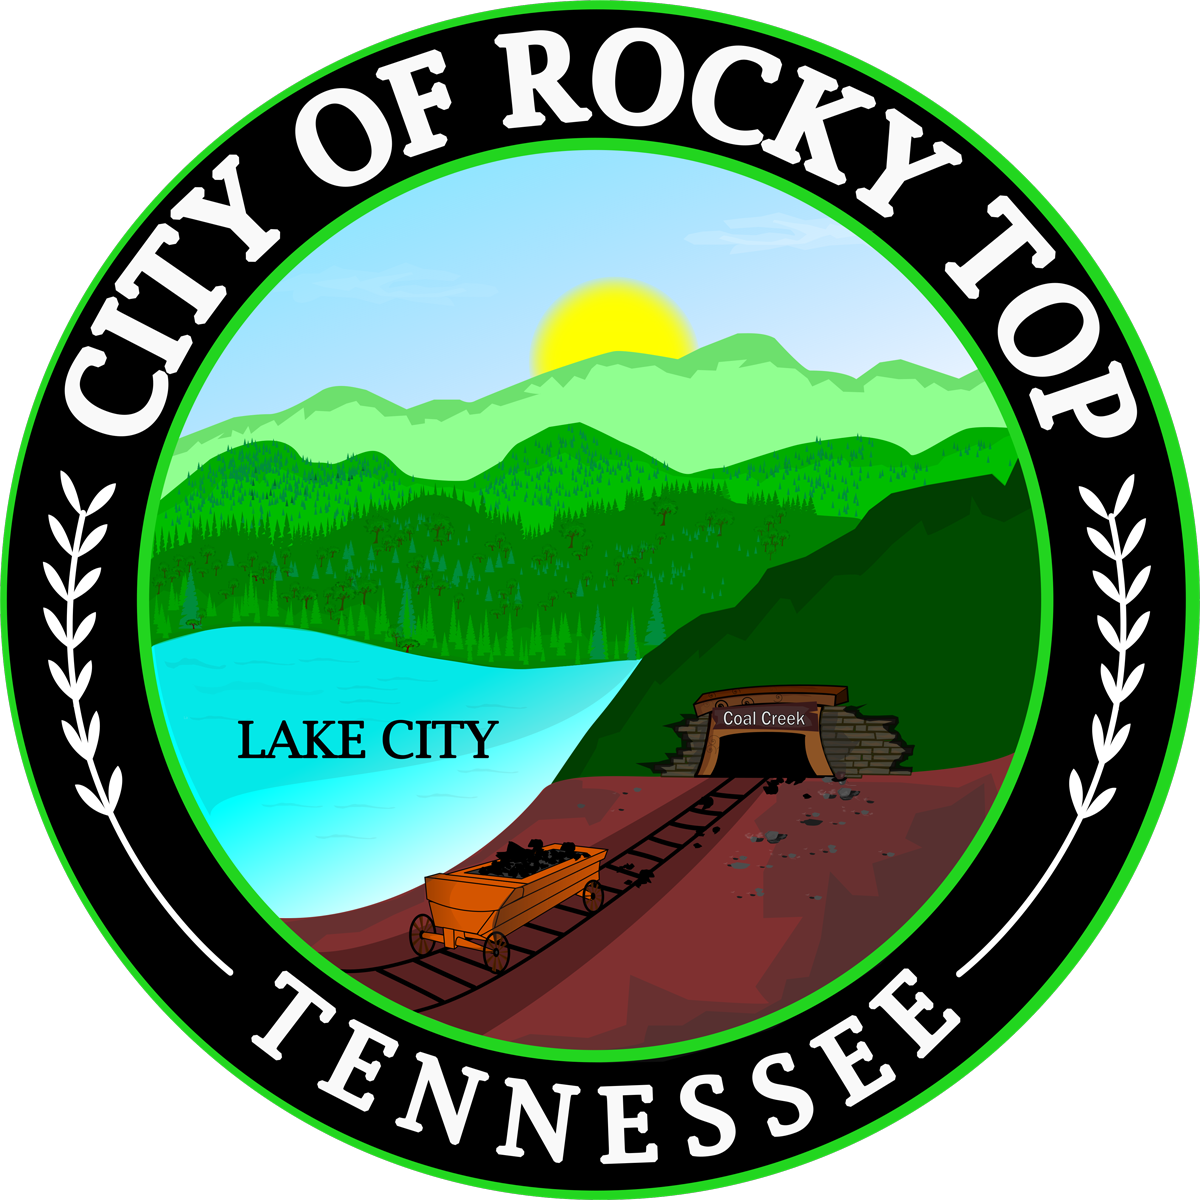 The City of Rocky Top